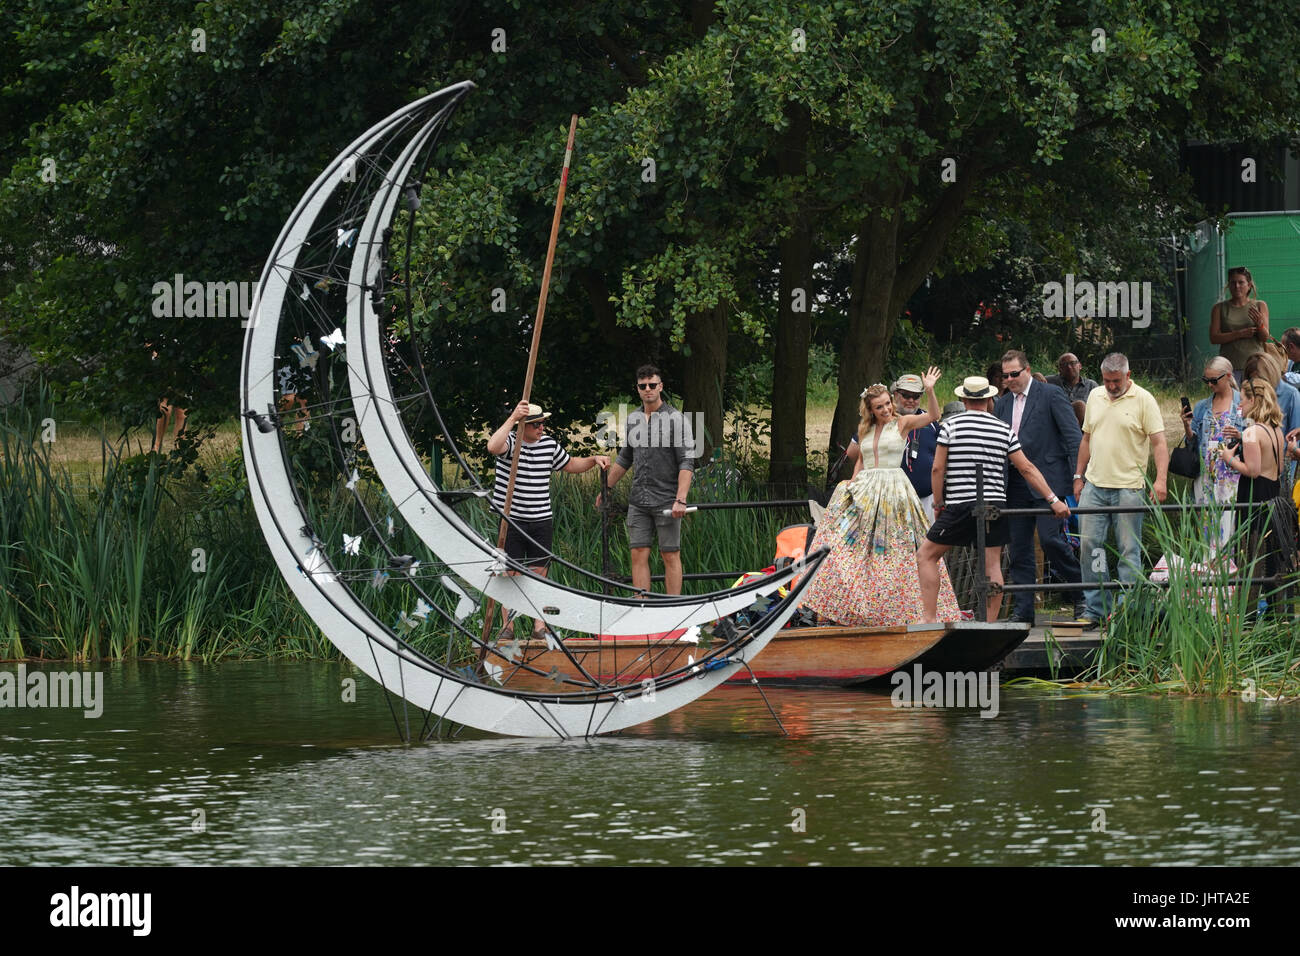 Latitude Festival, UK. 16th July, 2017. Katherine Jenkins arriving to get in a punt before performing on the stage by the lake on day 4 (Sunday) of the 2017 Latitude festival in Henham Park, Southwold in Suffolk. Photo date: Sunday, July 16, 2017. Photo credit should read: Roger Garfield/Alamy Live News. Stock Photo